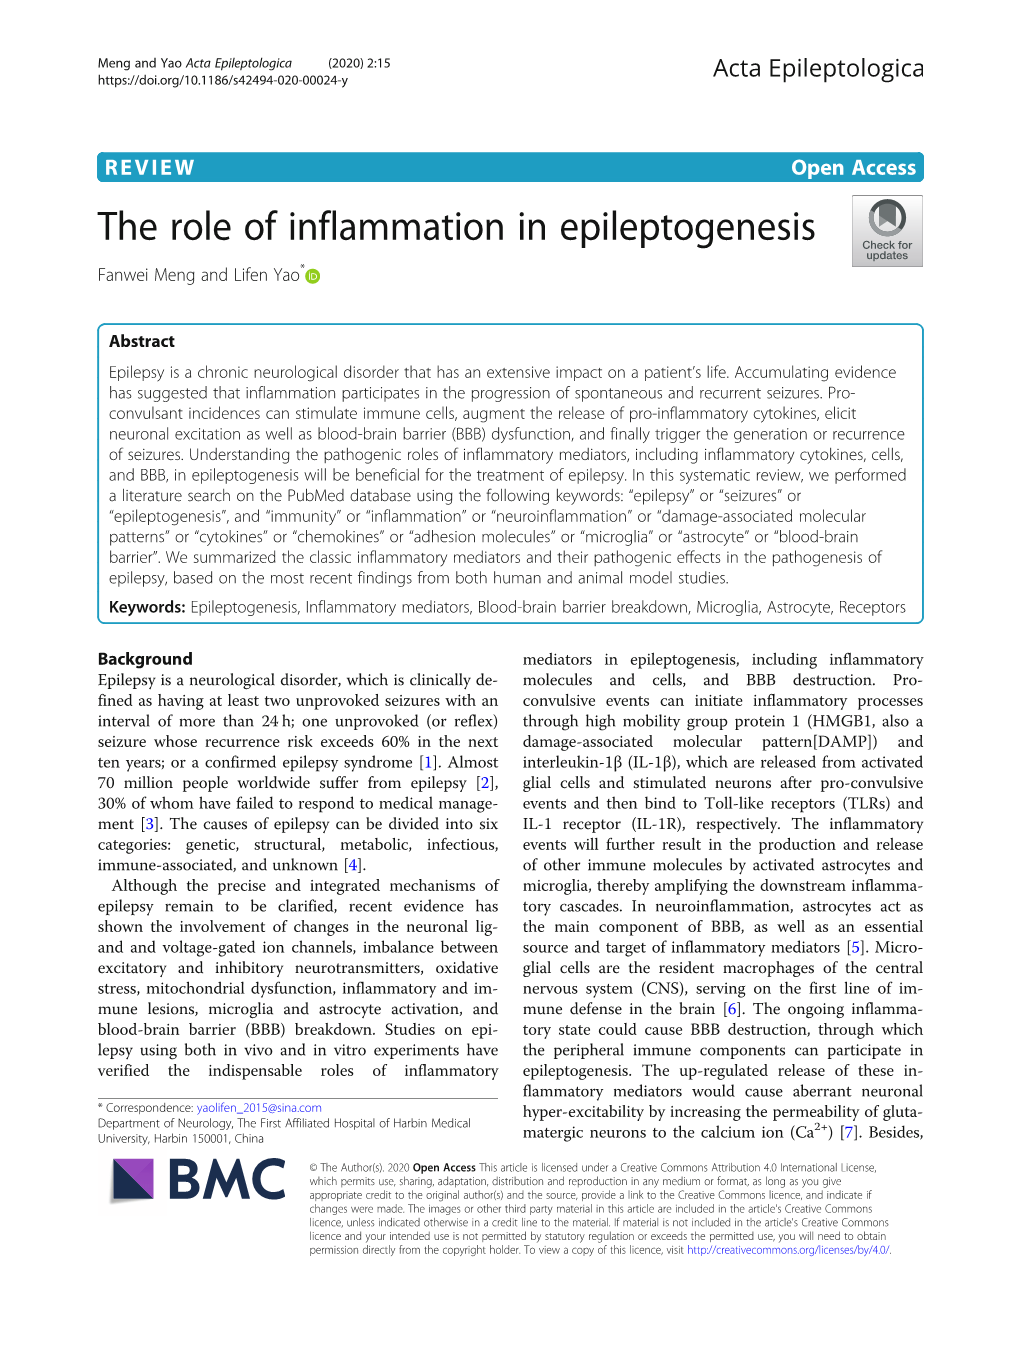 The Role of Inflammation in Epileptogenesis Fanwei Meng and Lifen Yao*